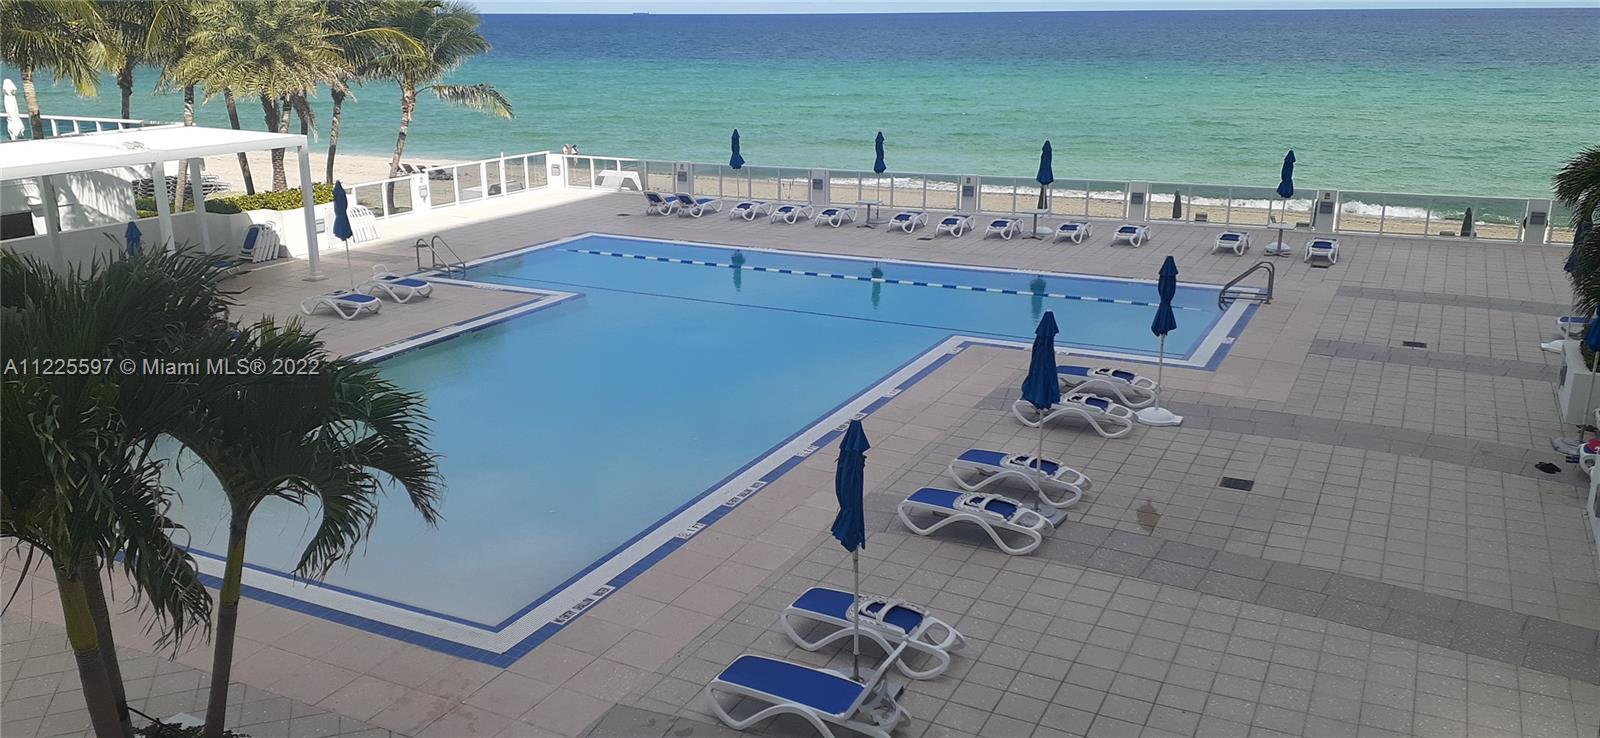 Amenities include 24-Hour front desk, valet, fitness center, 2 heated pool, beach service, game room